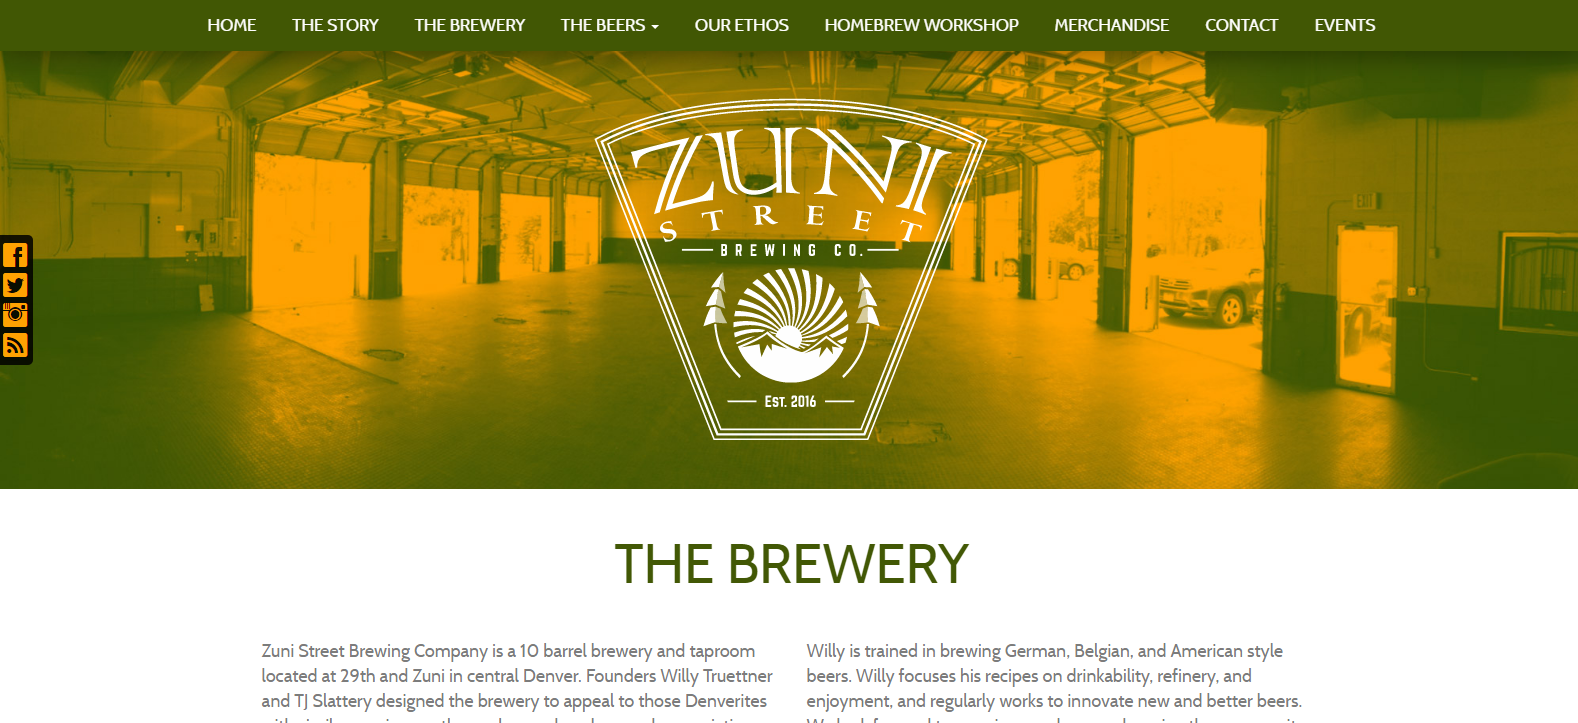 
New Website Launched: Zuni Street Brewing Co.